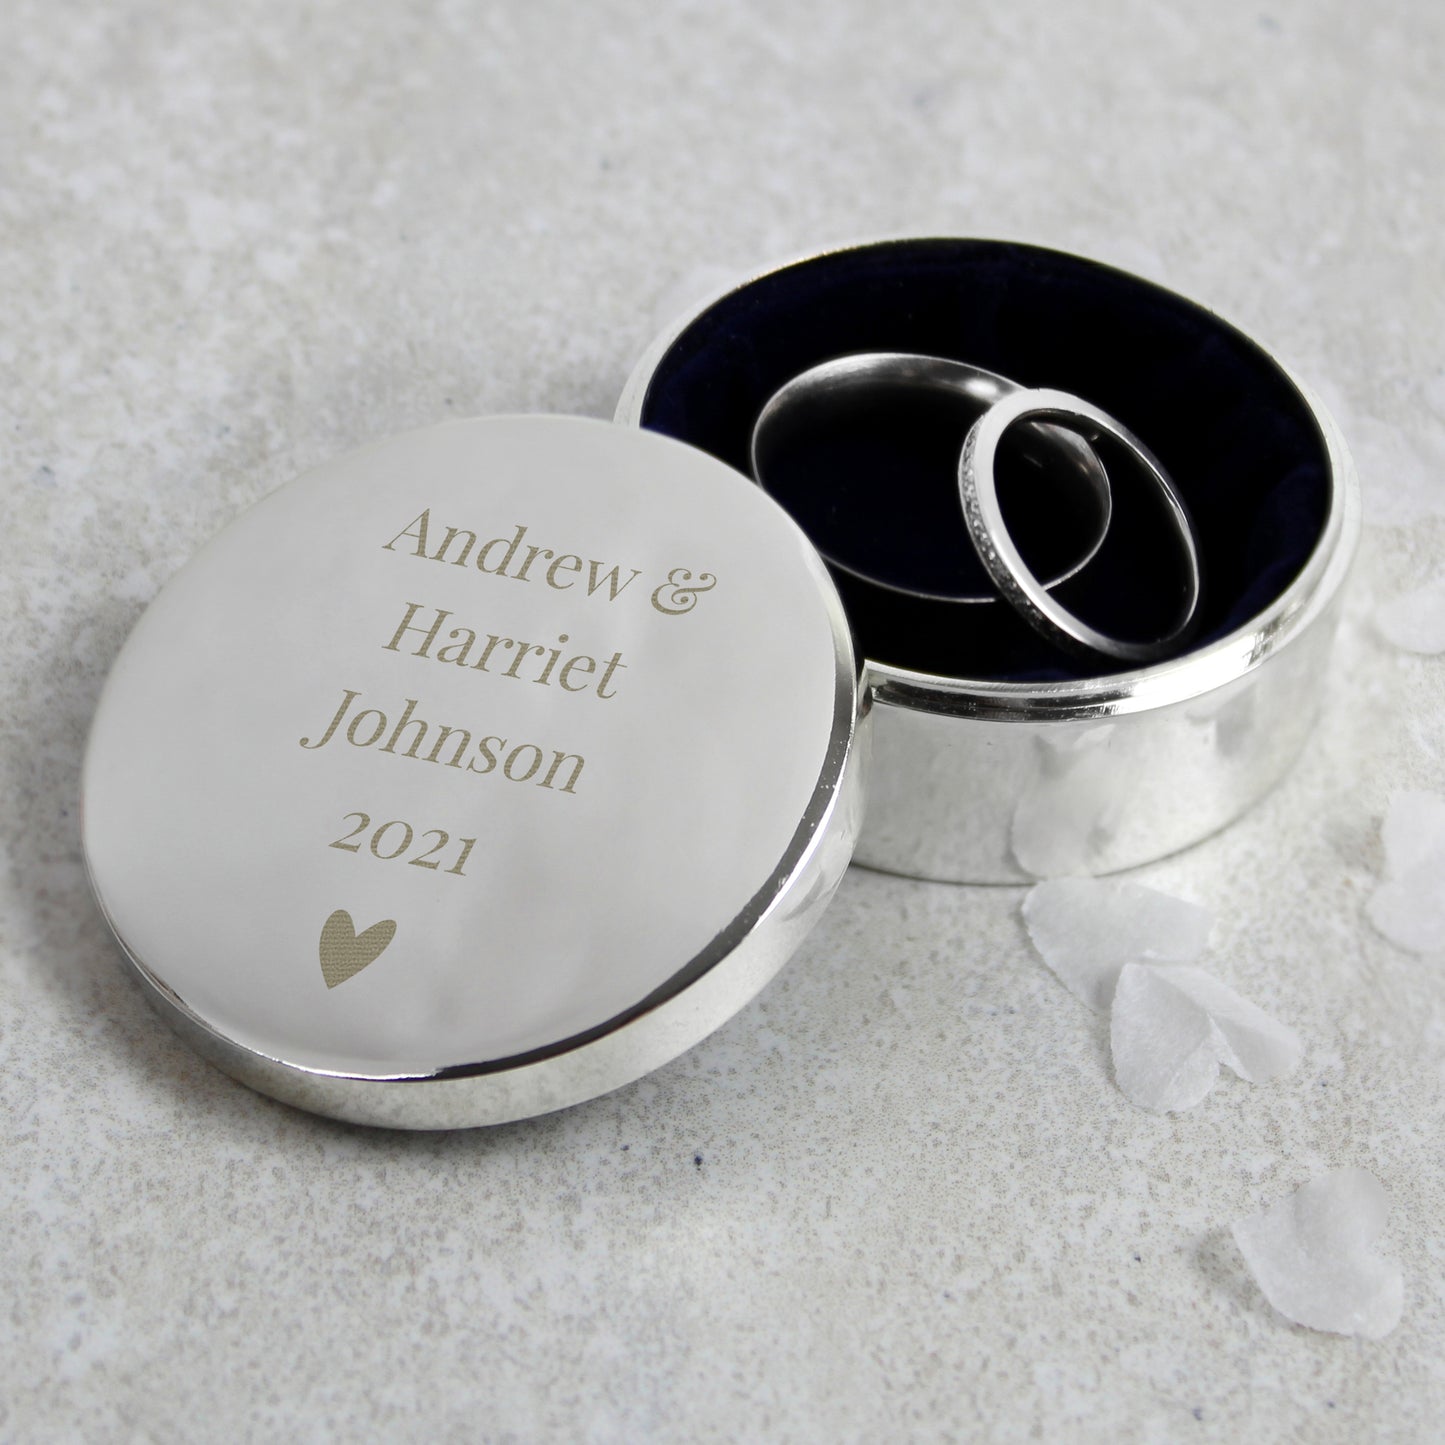 Personalised ring box with love heart and couple's names and wedding date